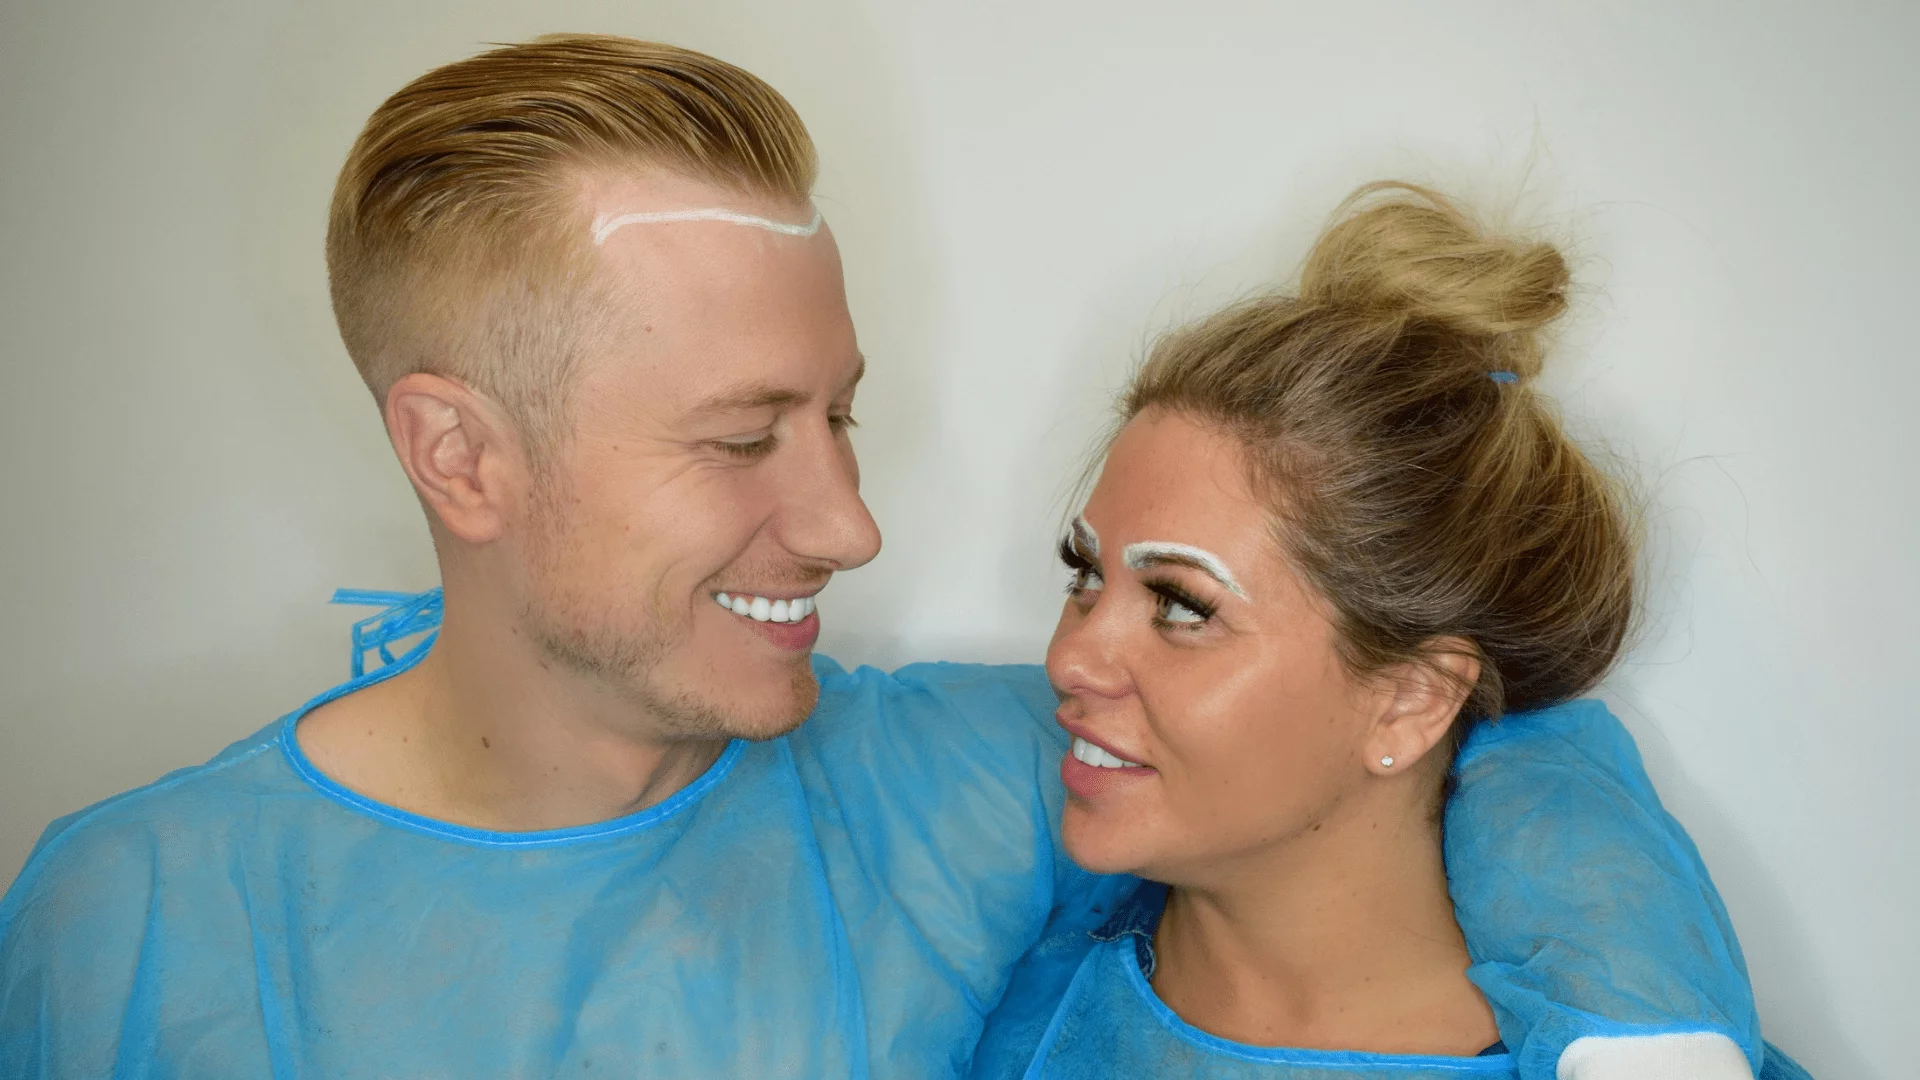 HIS AND HERS FUE TRANSPLANT – BIANCA GASCOIGNE AND KRIS BOYSON